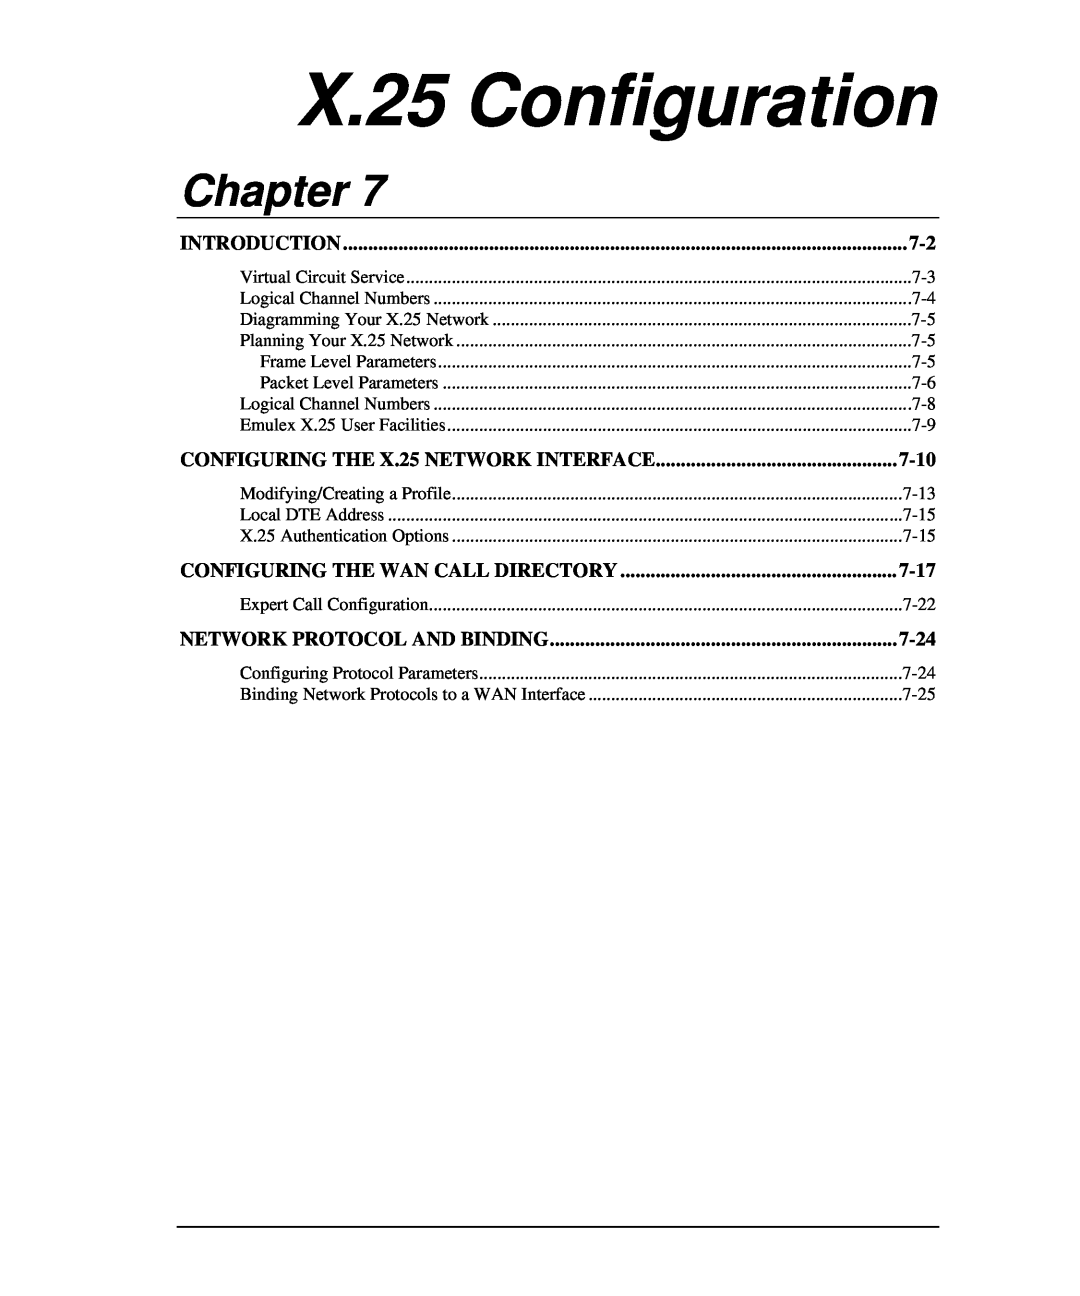 Emulex DCP_link manual X.25 Configuration, Chapter, Introduction, CONFIGURING THE X.25 NETWORK INTERFACE, 7-17, 7-24, 7-10 